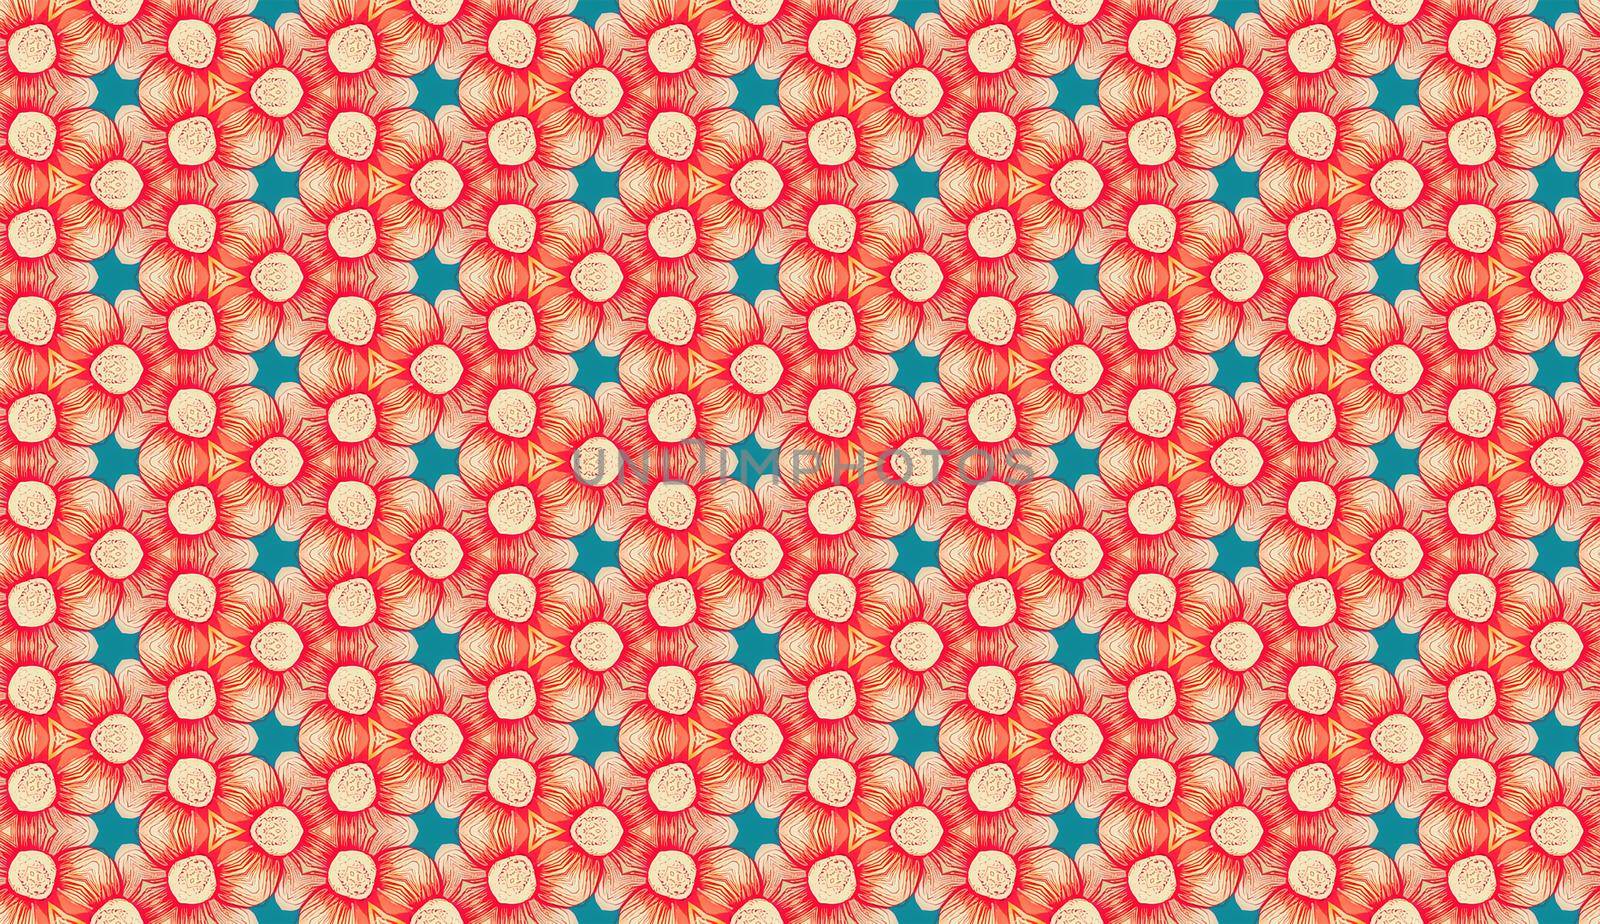 Quilting fabric in geometric shapes seamless repeating pattern. Artistic creative illustration.